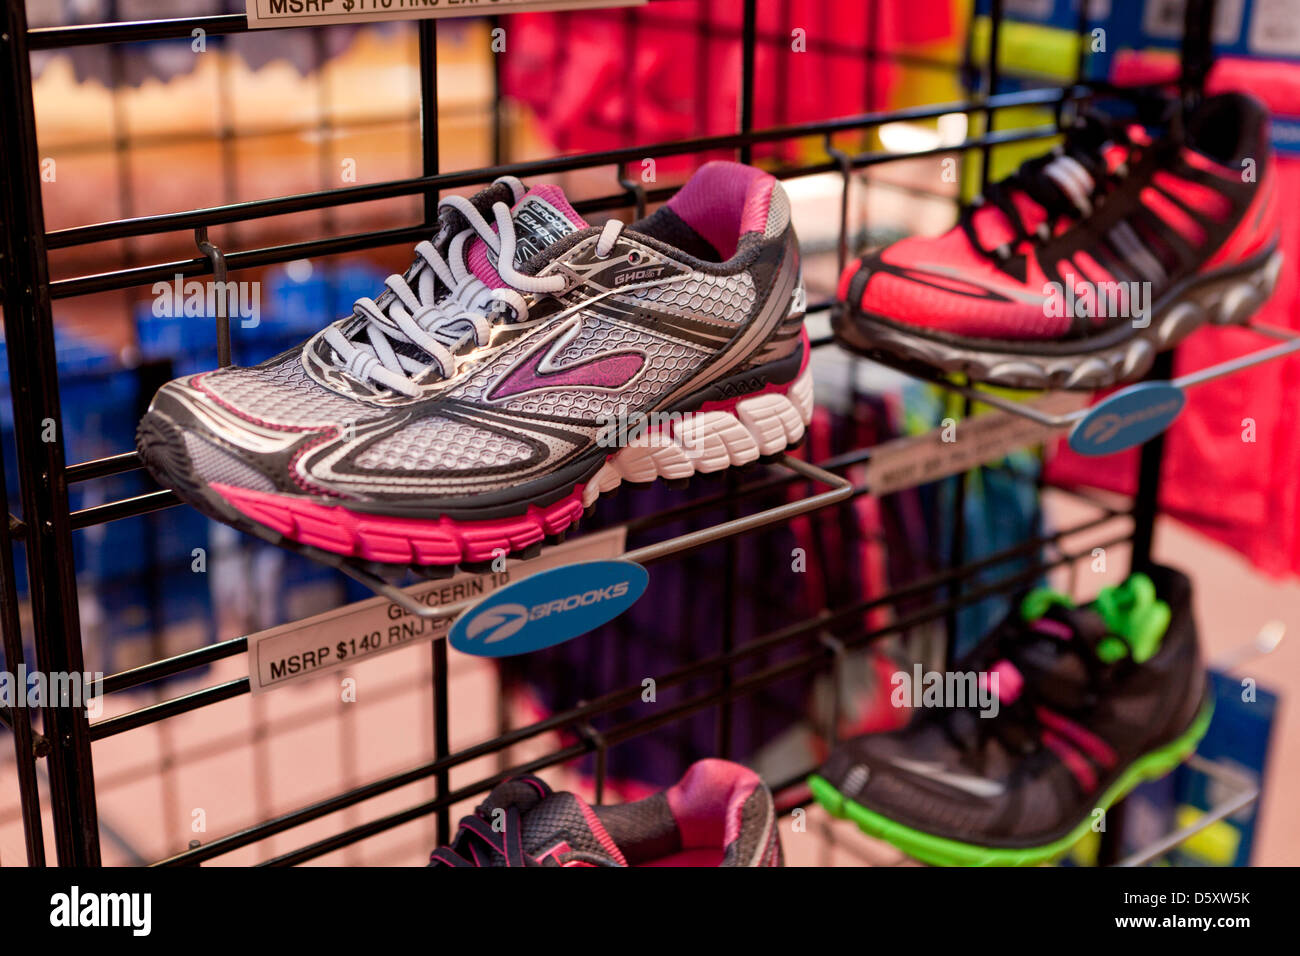 New running shoes on display Stock Photo